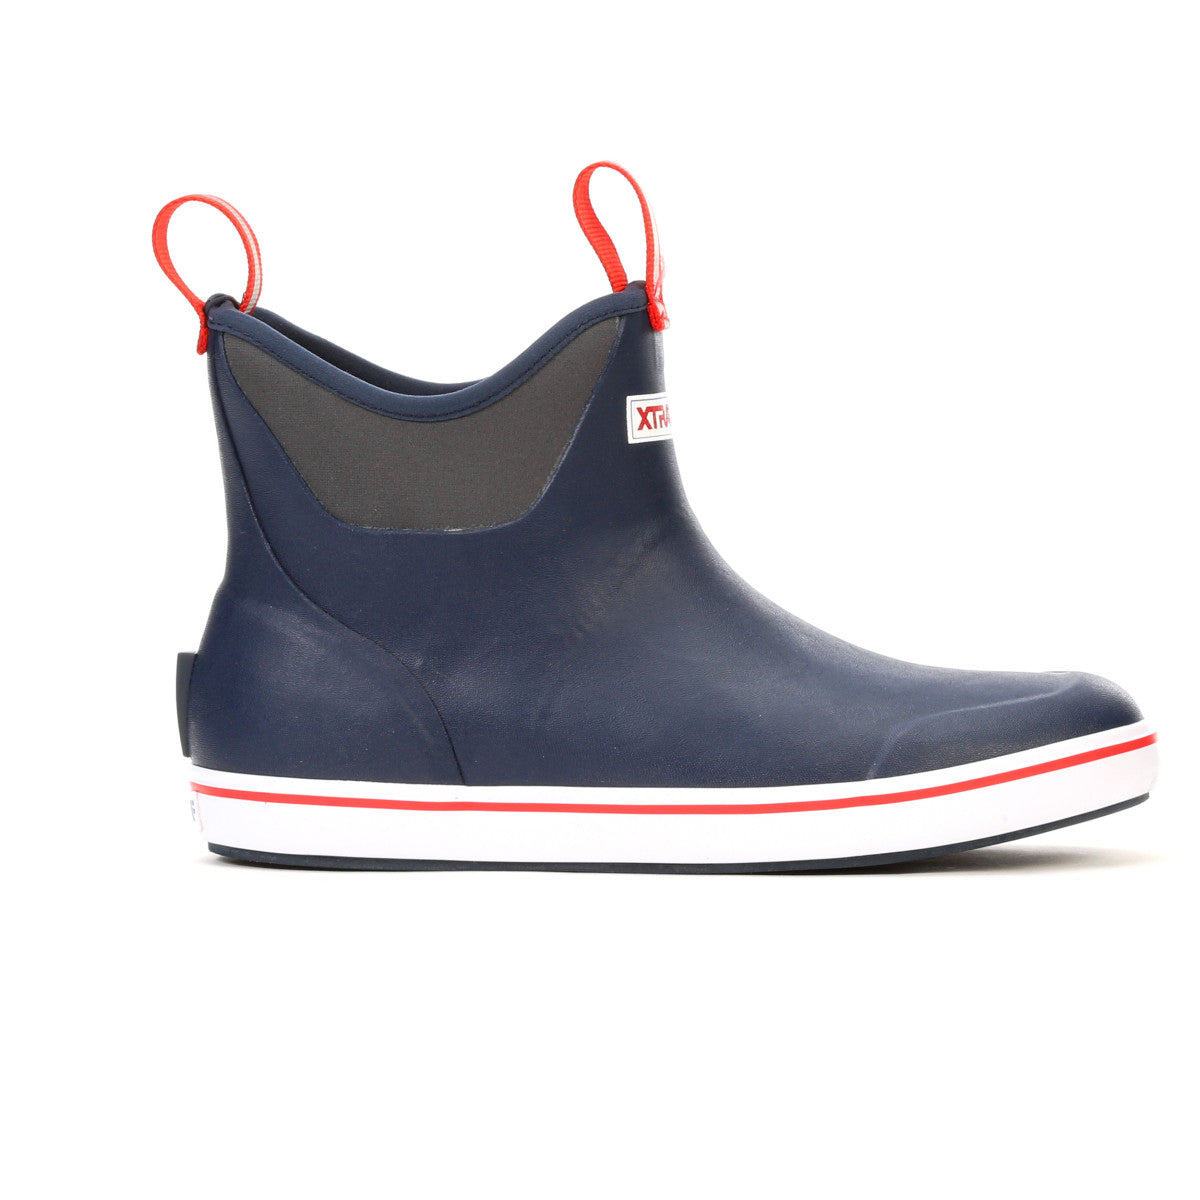 Men's Xtratuf 6" Ankle Deck Boot in Navy/Red from the side